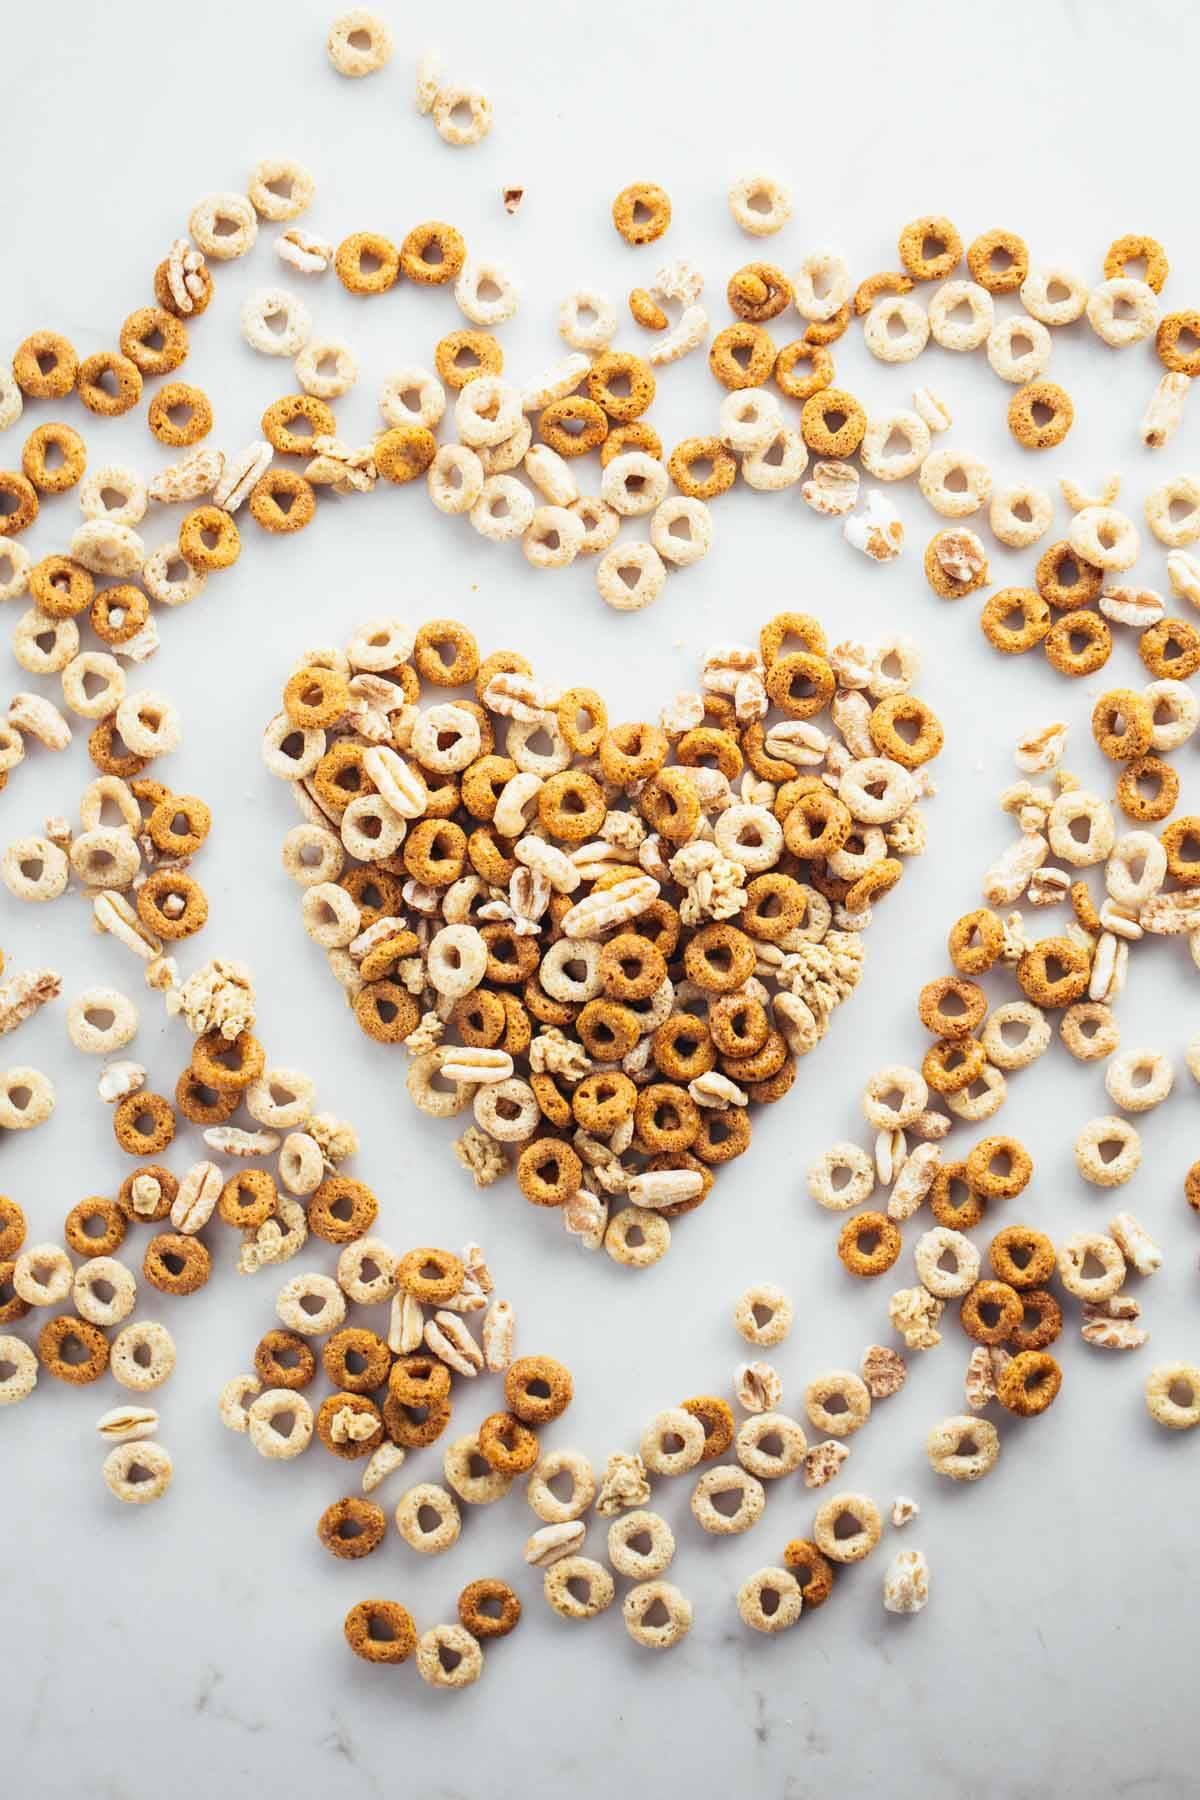 Cheerios in the shape of a heart.